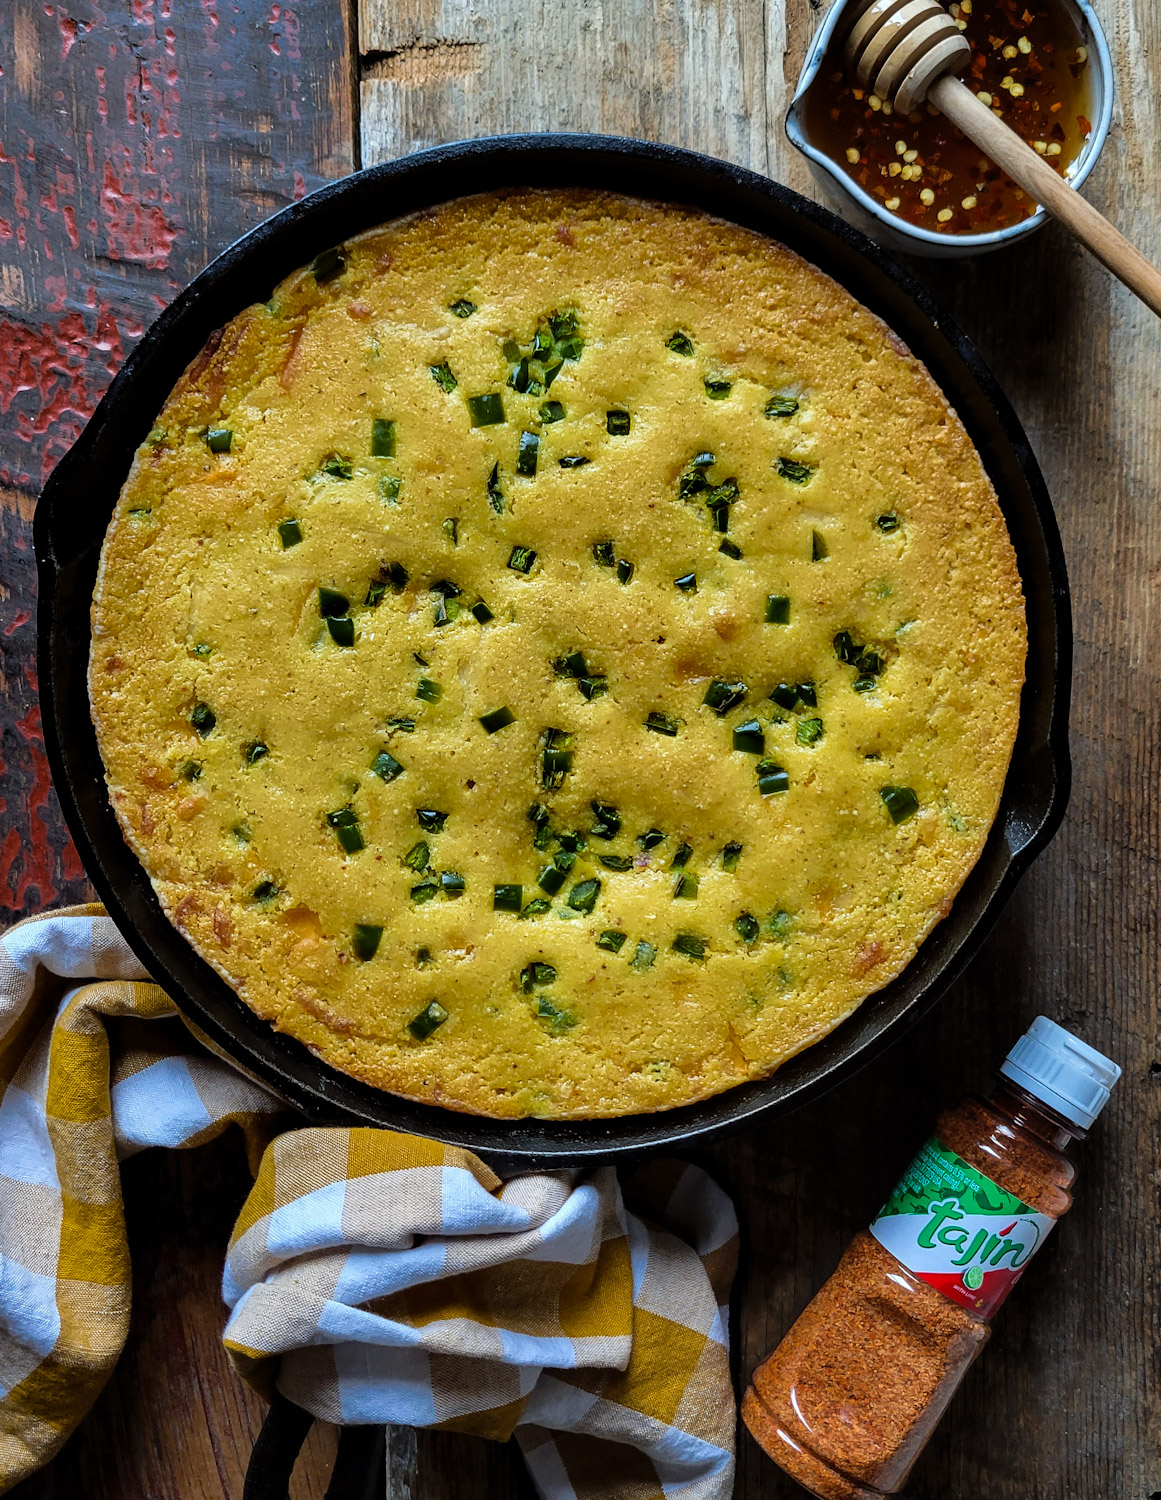 A skillet with a baked Jalapeno Cheddar Cornbread is sitting on a wooden counter, with hot honey and Tajín seasoning to the side.